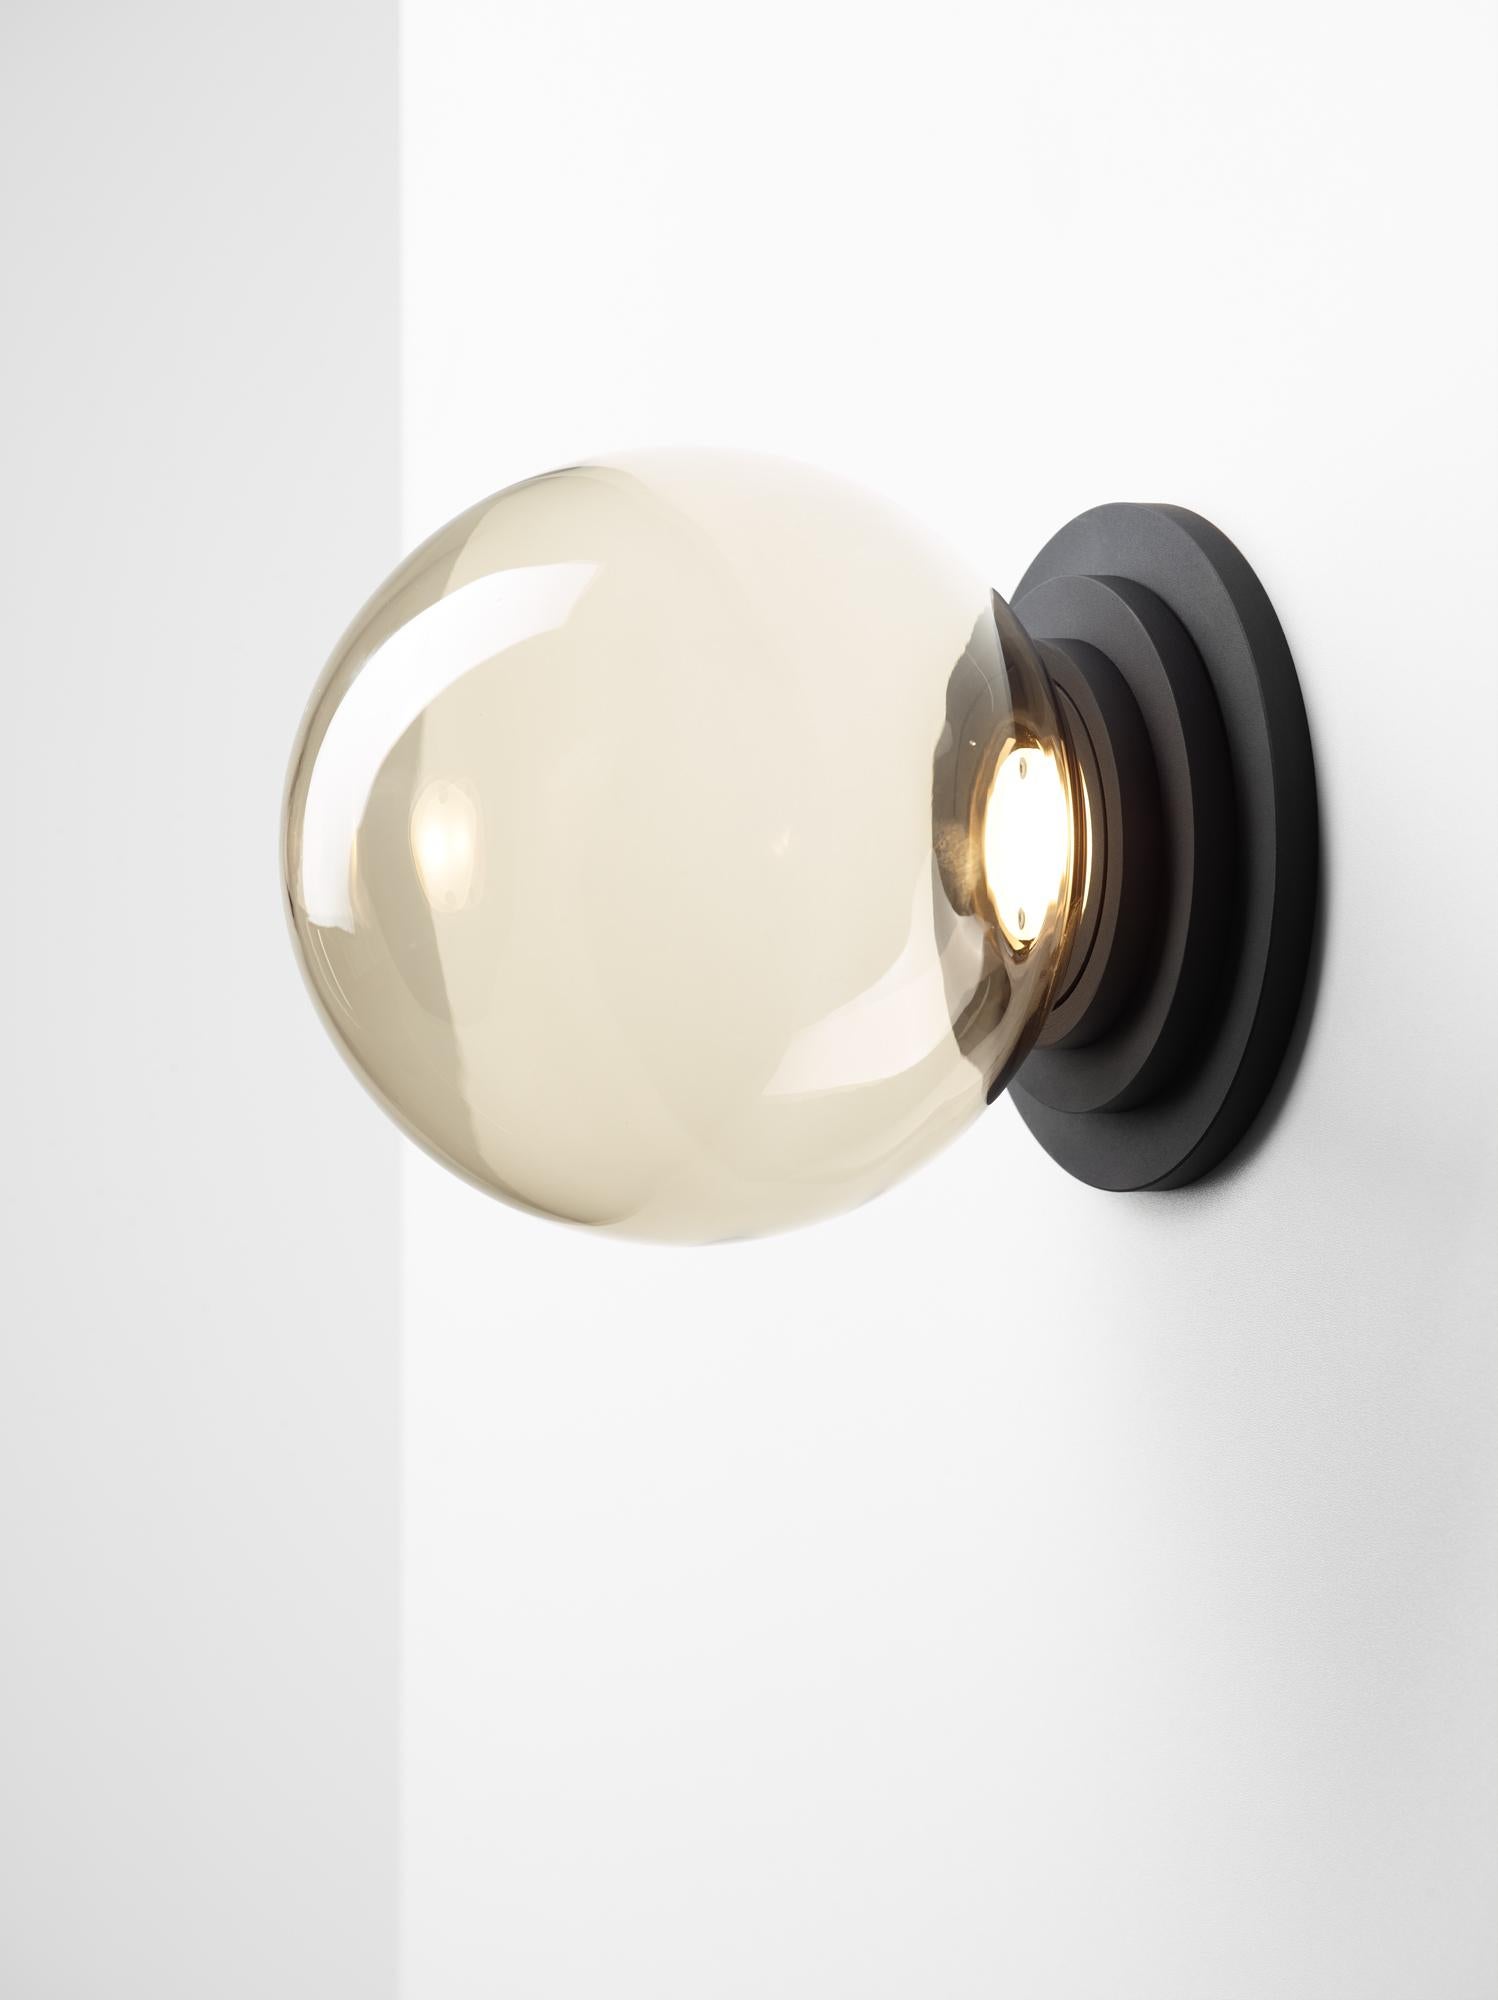 Black Stratos Ball Wall Light by Dechem Studio
Dimensions: D 18 x H 20 cm
Materials: Aluminum, Glass.
Also Available: Different colours available.

Different shapes of capsules and spheres contrast with anodized alloy fixtures, creating a